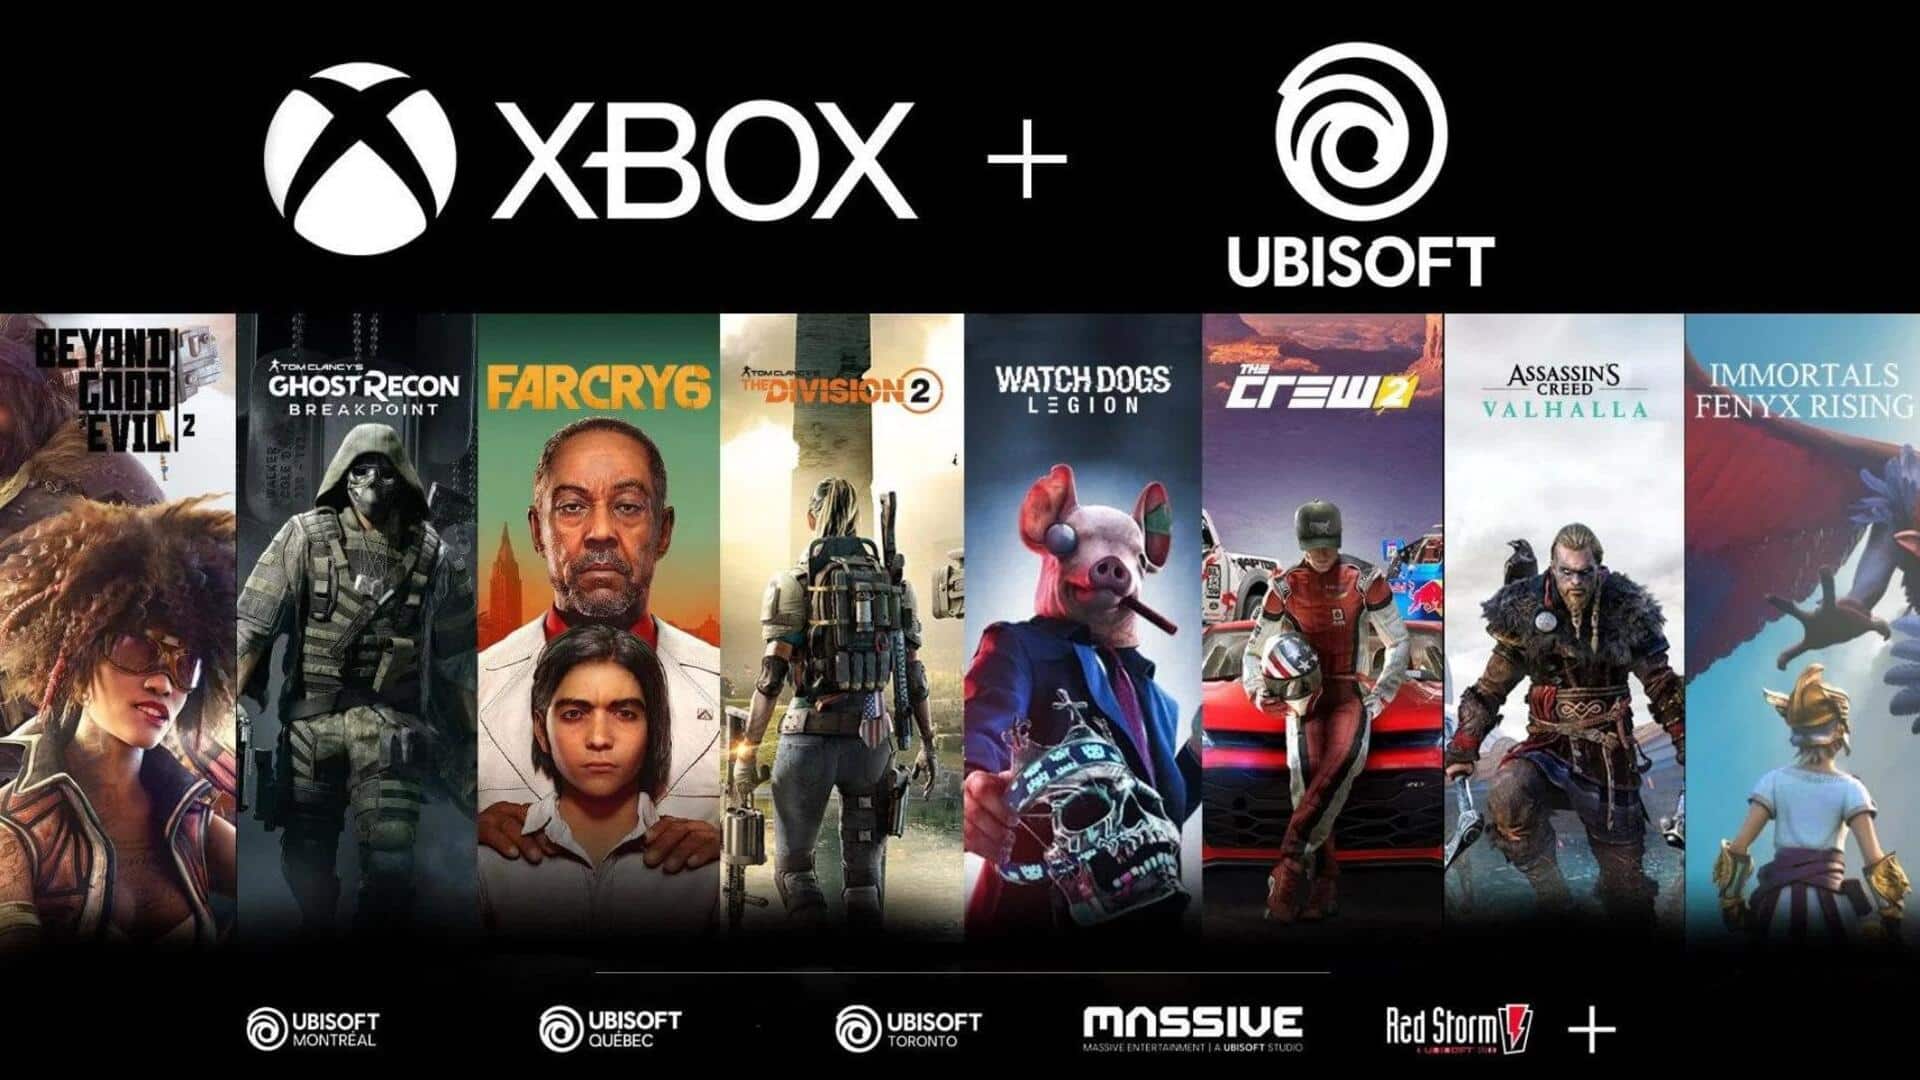 Eyeing UK approval, Microsoft sells Activision cloud rights to Ubisoft